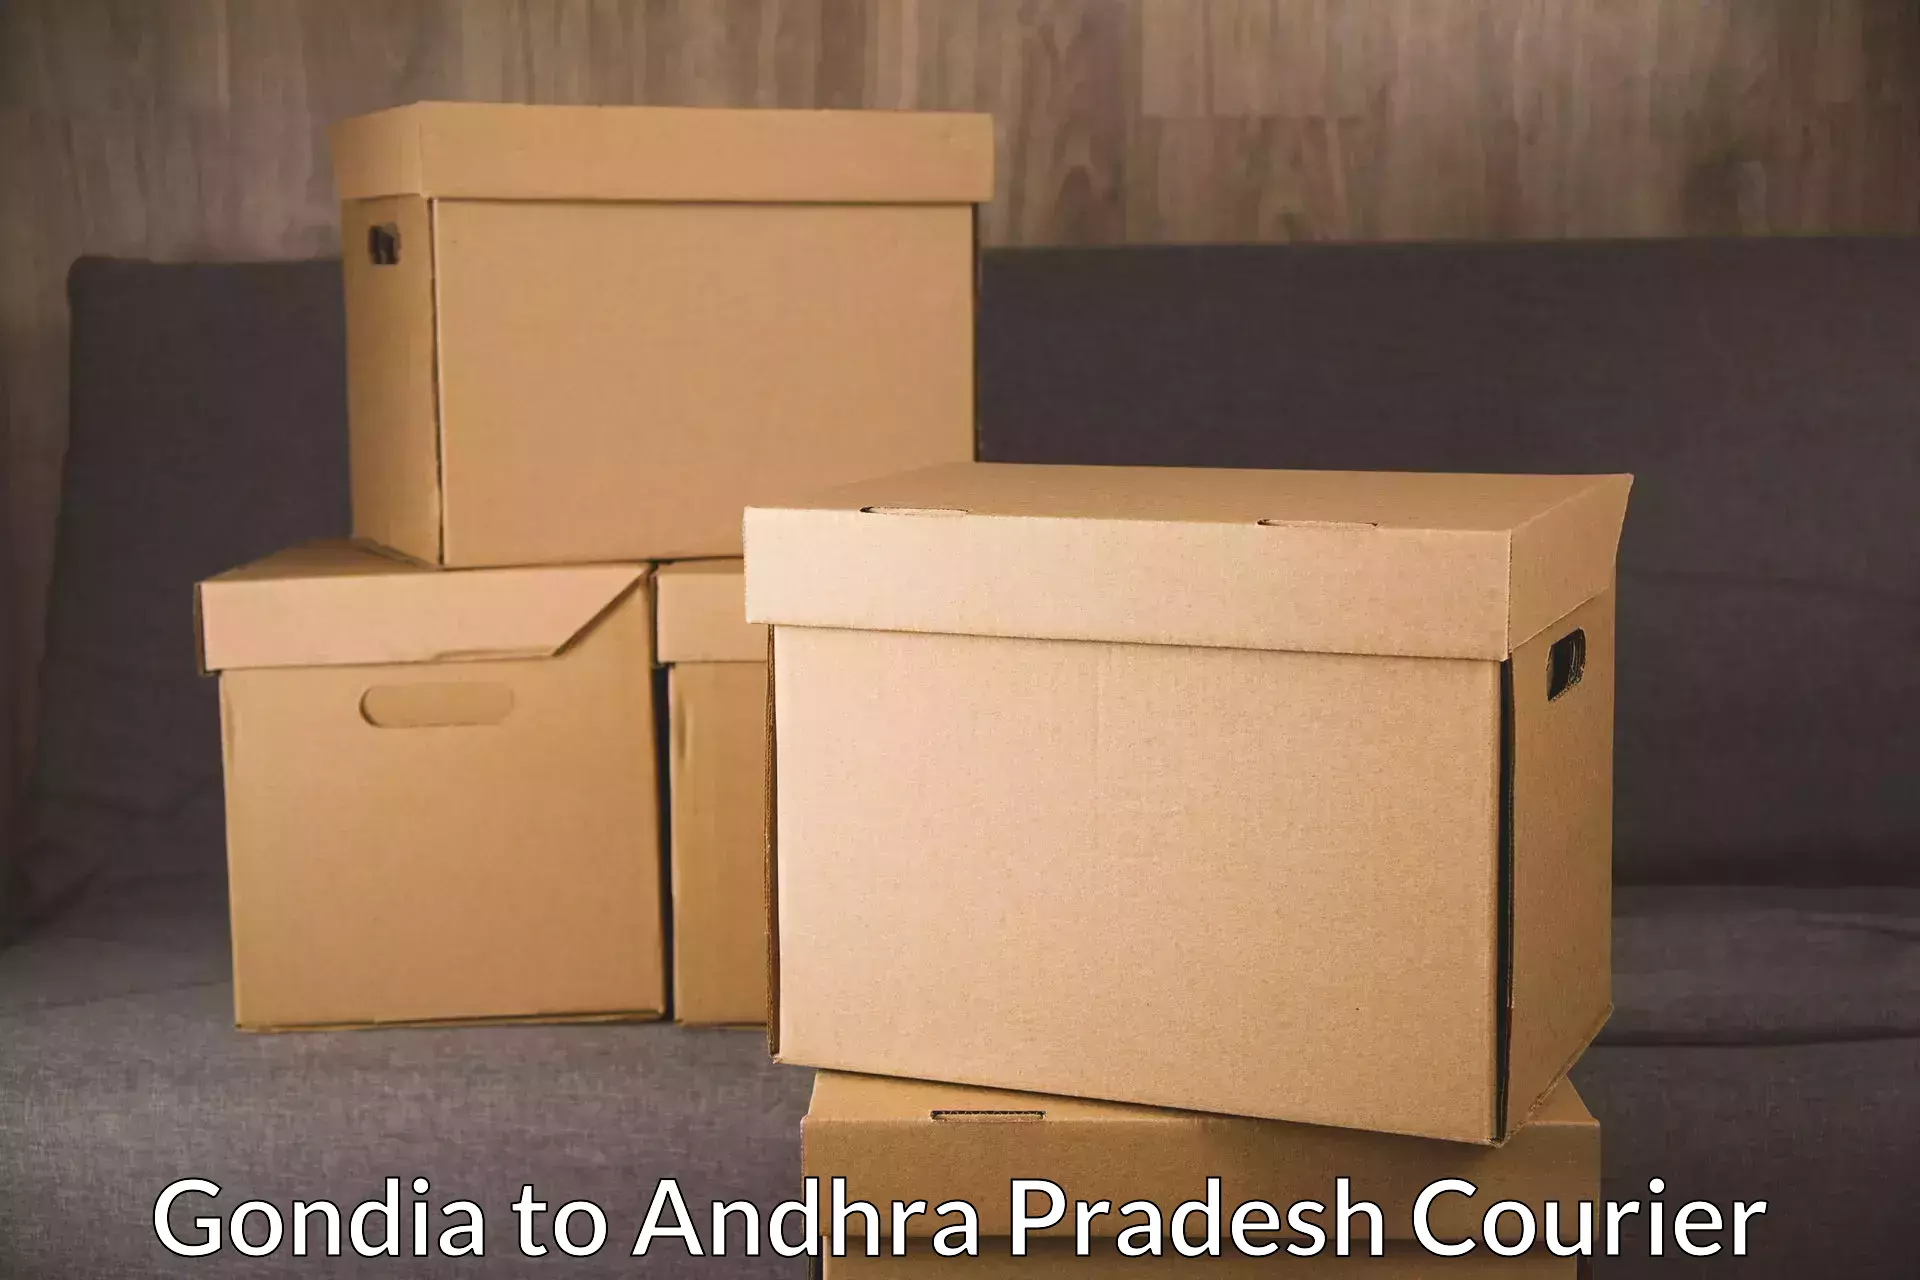 State-of-the-art courier technology Gondia to Vidyanagar Nellore